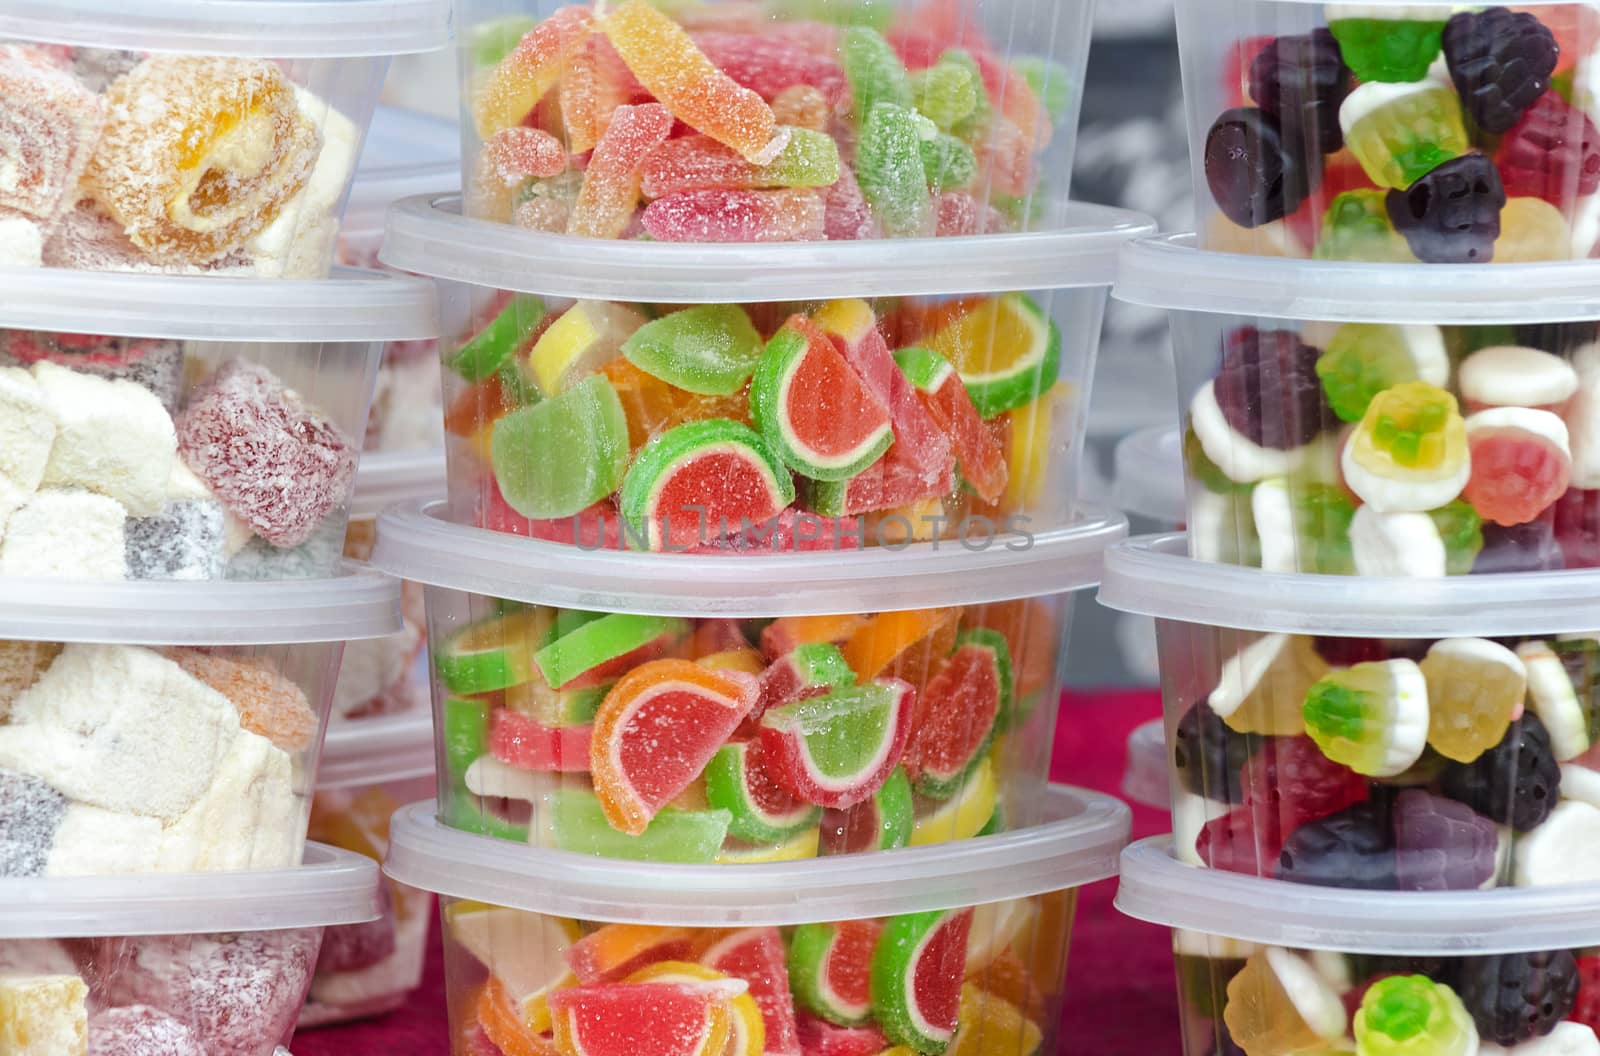 Candy in plastic containers on the market by Gaina